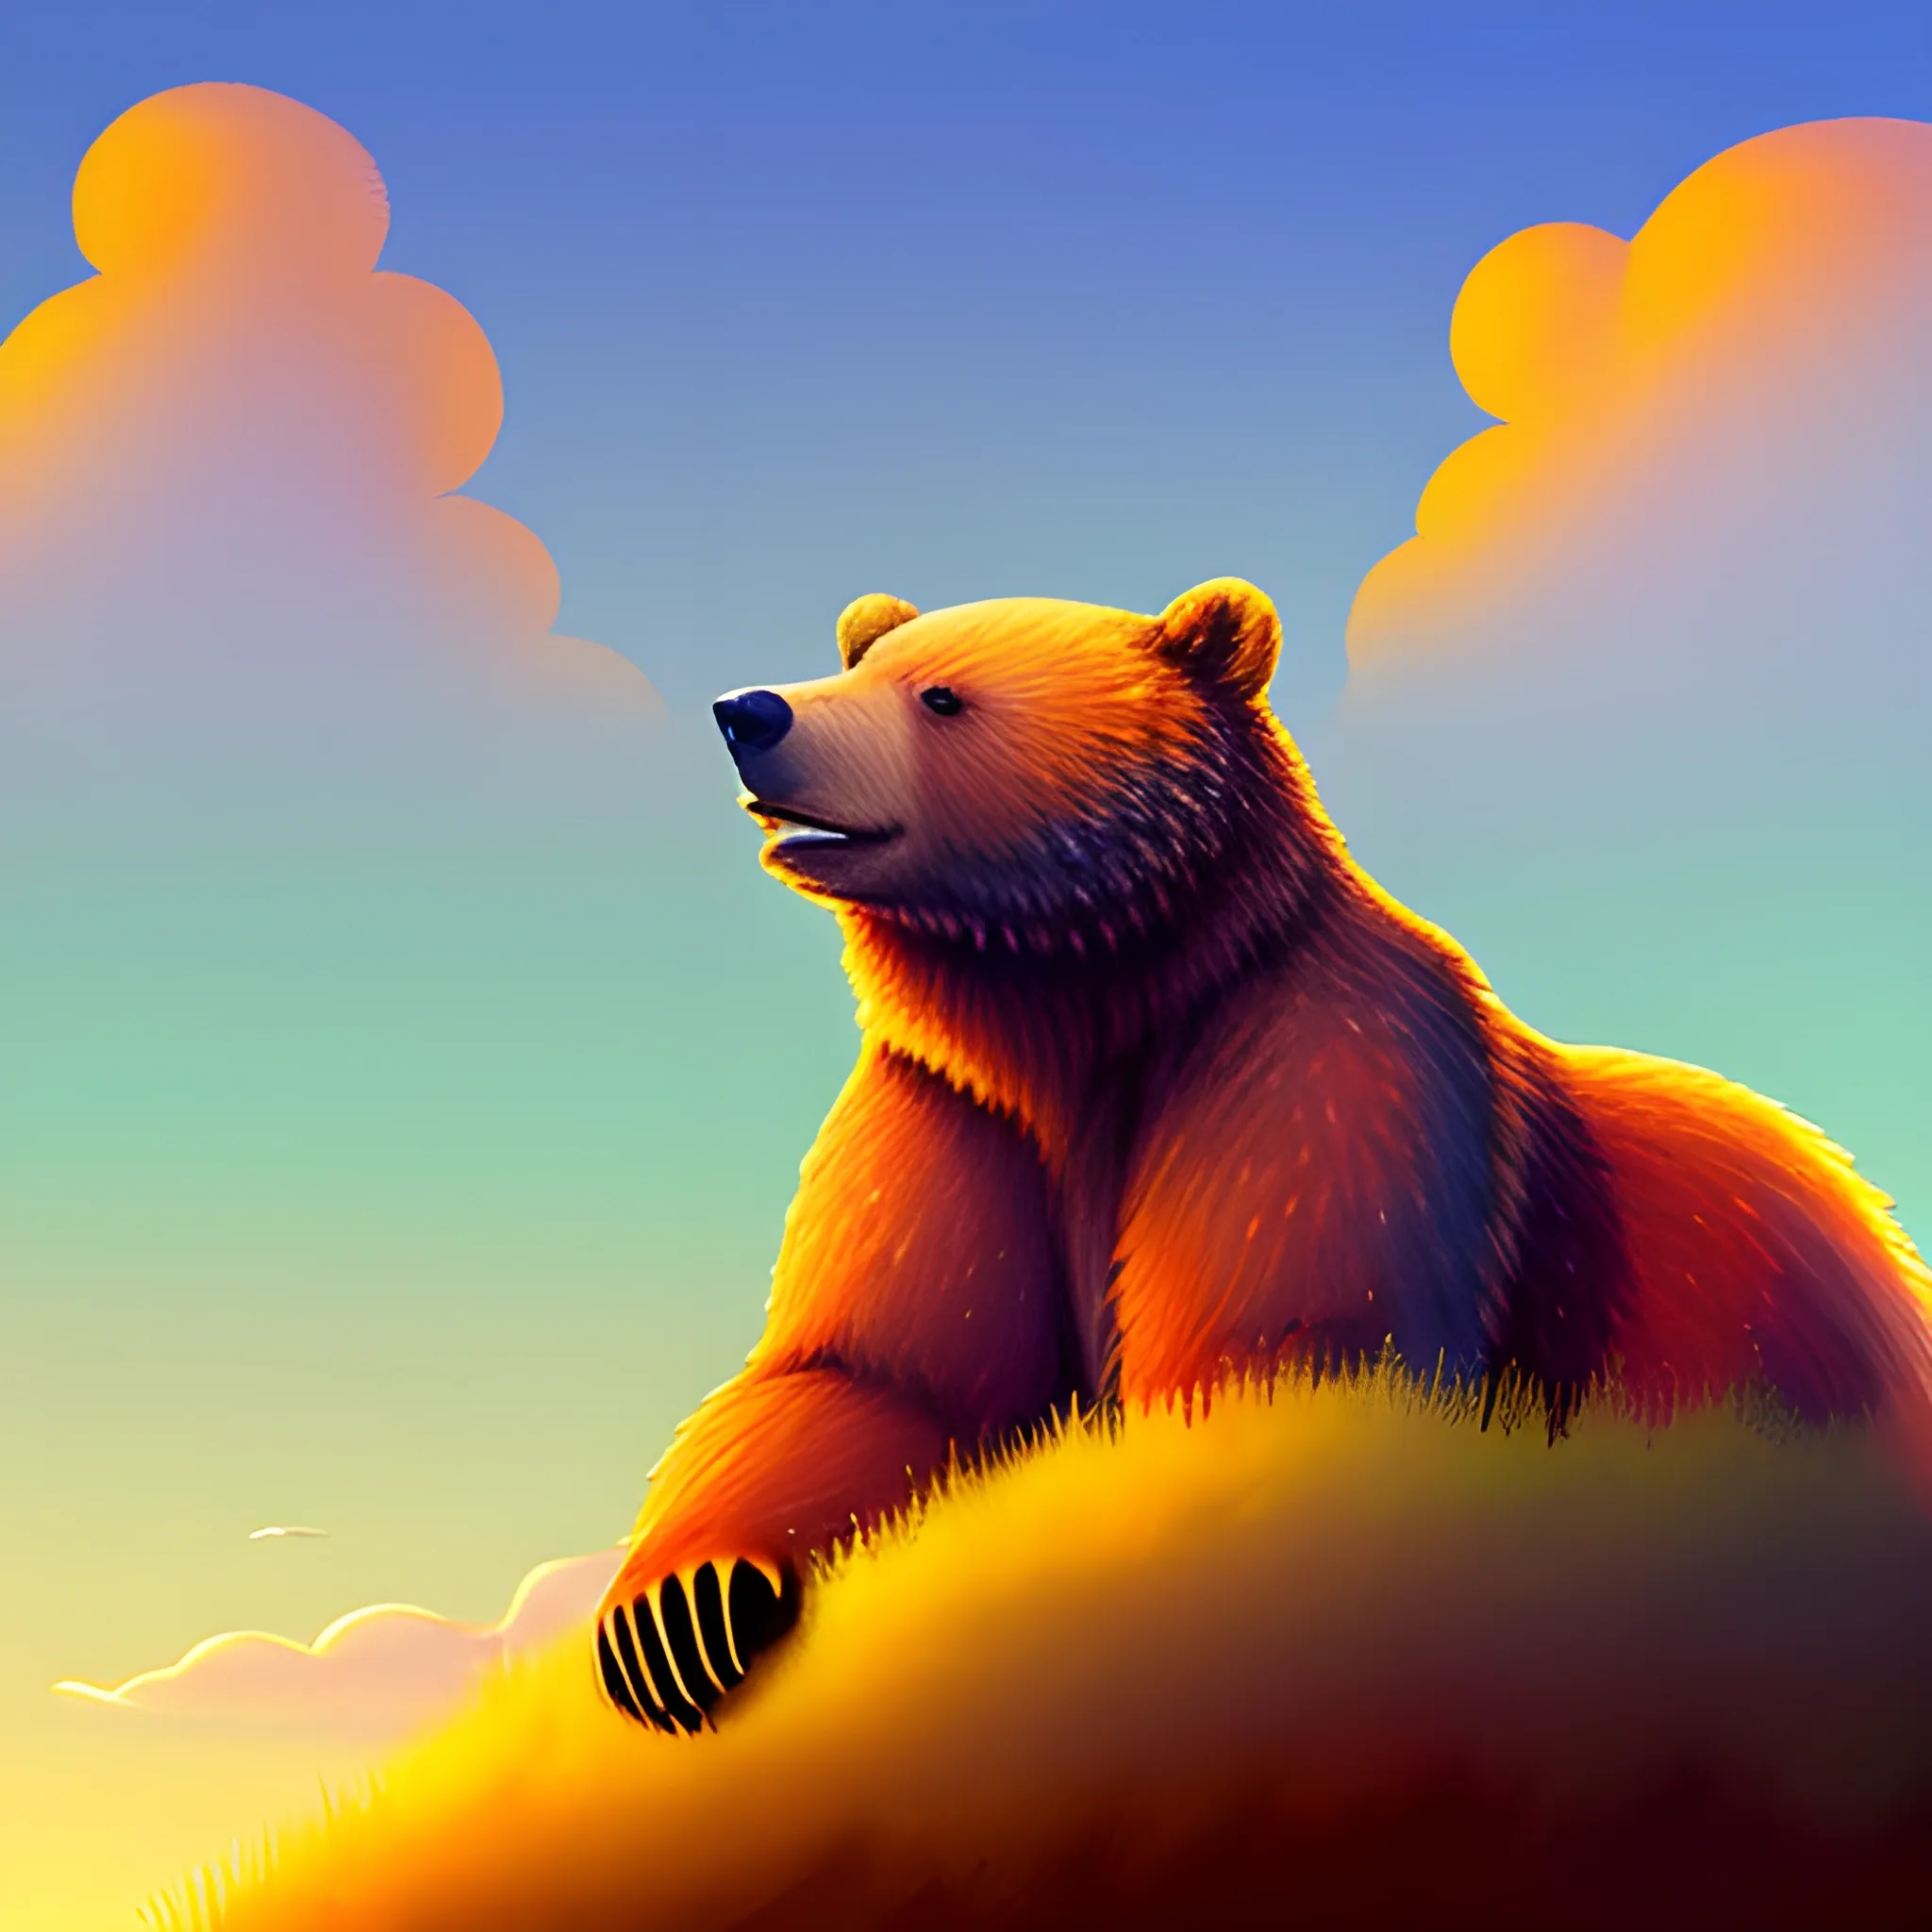 illustration of baby bear on a cloud over the skies and the landscape with daylight below, in digital painting style with warm colors